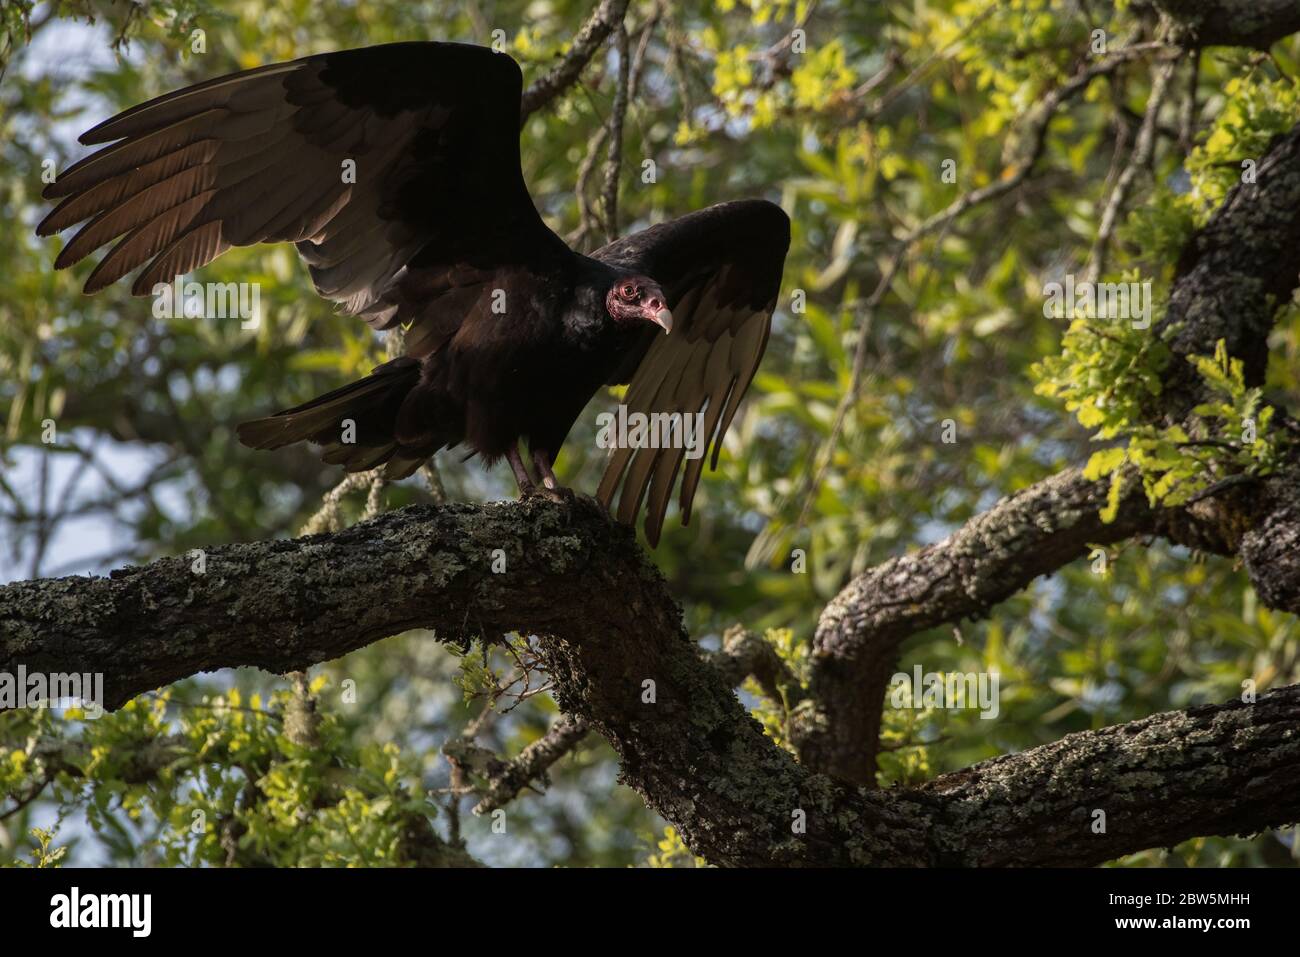 A turkey vulture (Cathartes aura) in one of the East Bay regional parks in the California Bay area. Stock Photo